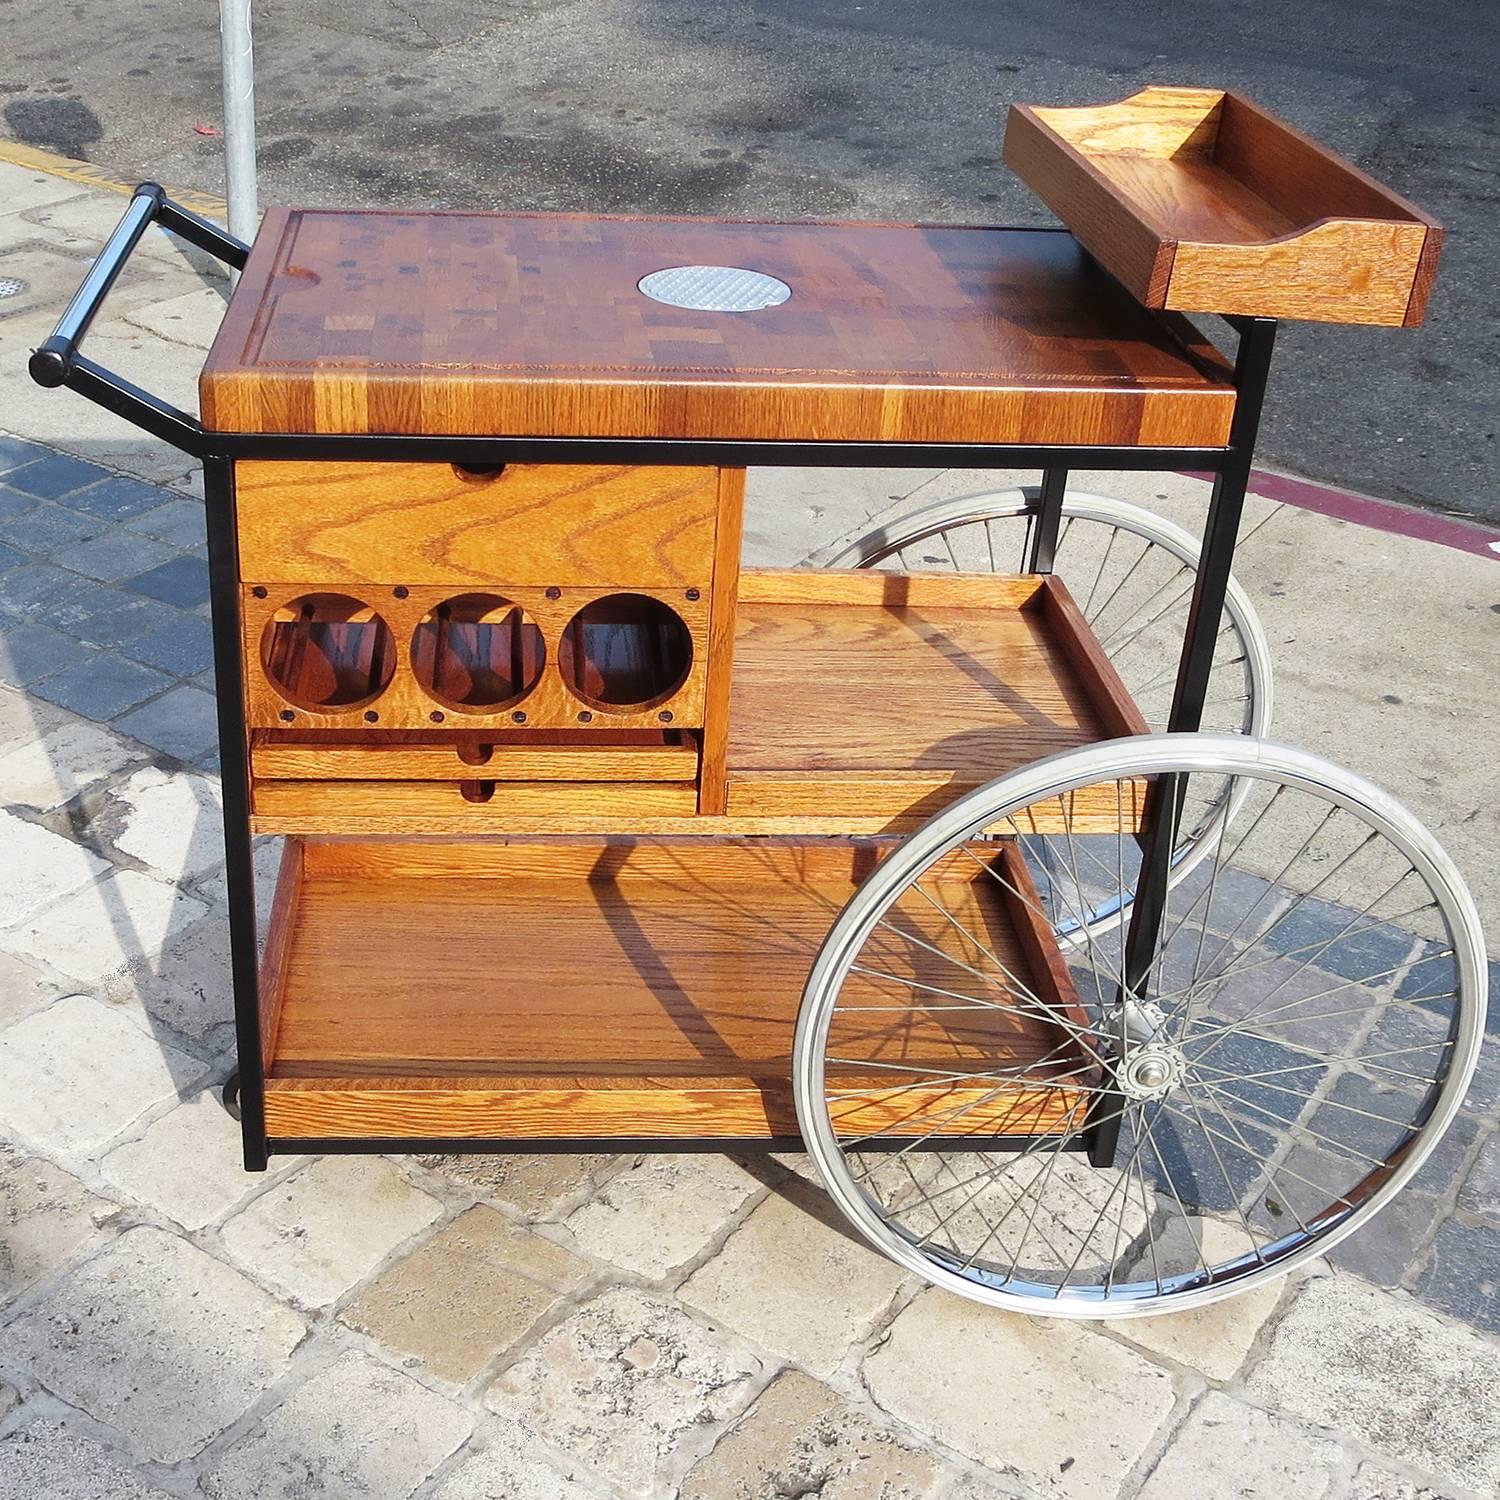 RETIREMENT SALE!!!  EVERYTHING MUST GO - CHECK OUT OUR OTHER ITEMS.				

Featured in the Pasadena Exhibit California Design Nine and pictured in the accompanying periodical, this cart was designed by Californian Bill W. Sanders. This is the earlier